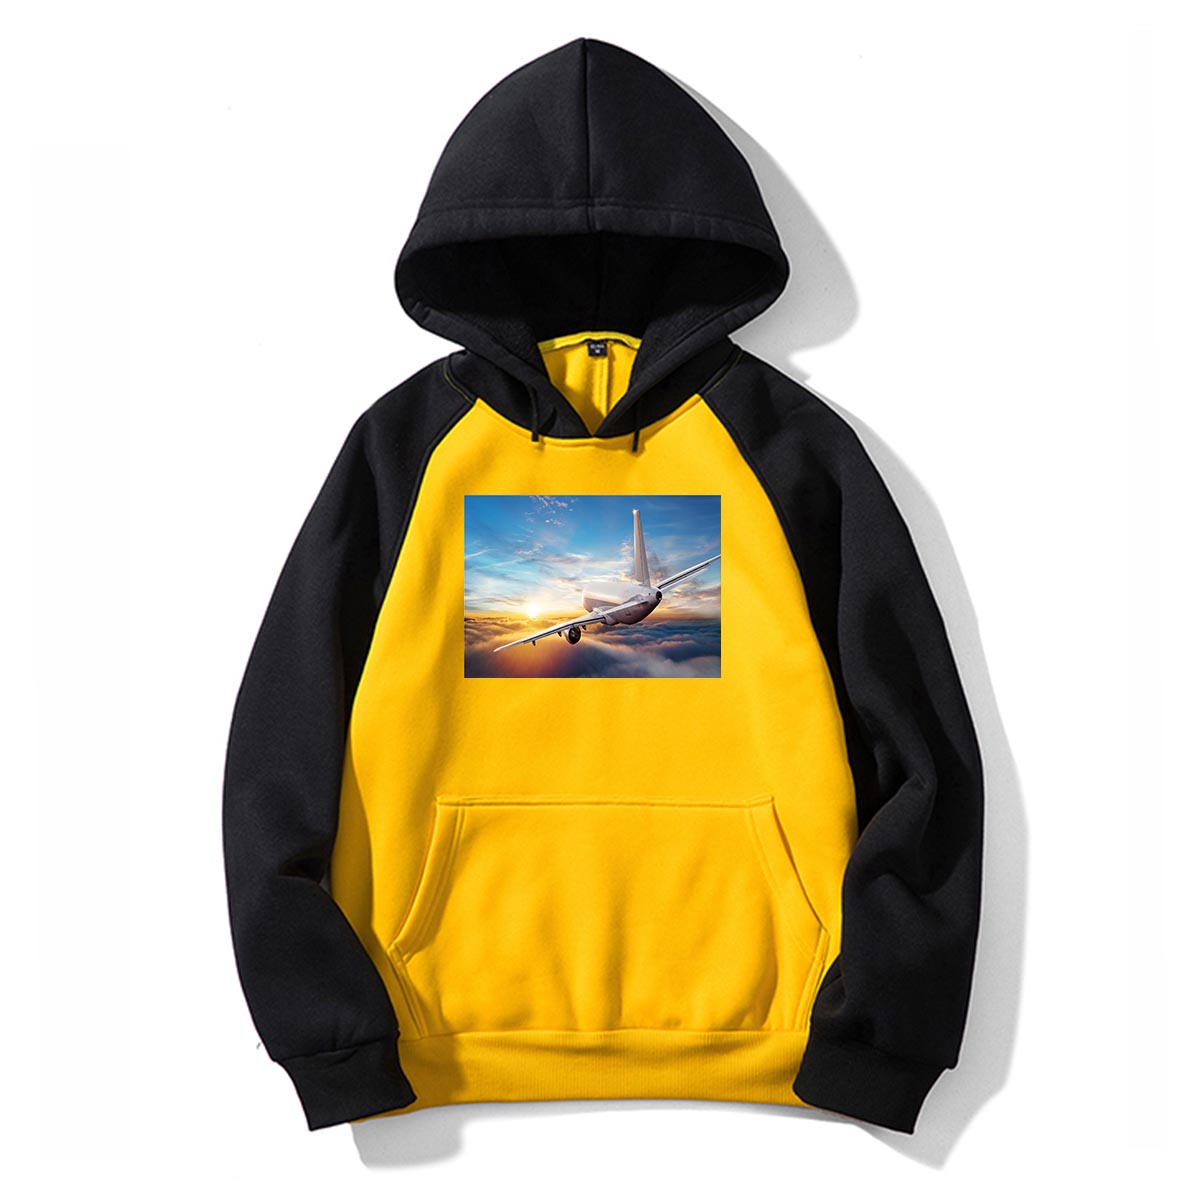 Airplane Flying over Big Buildings Designed Colourful Hoodies